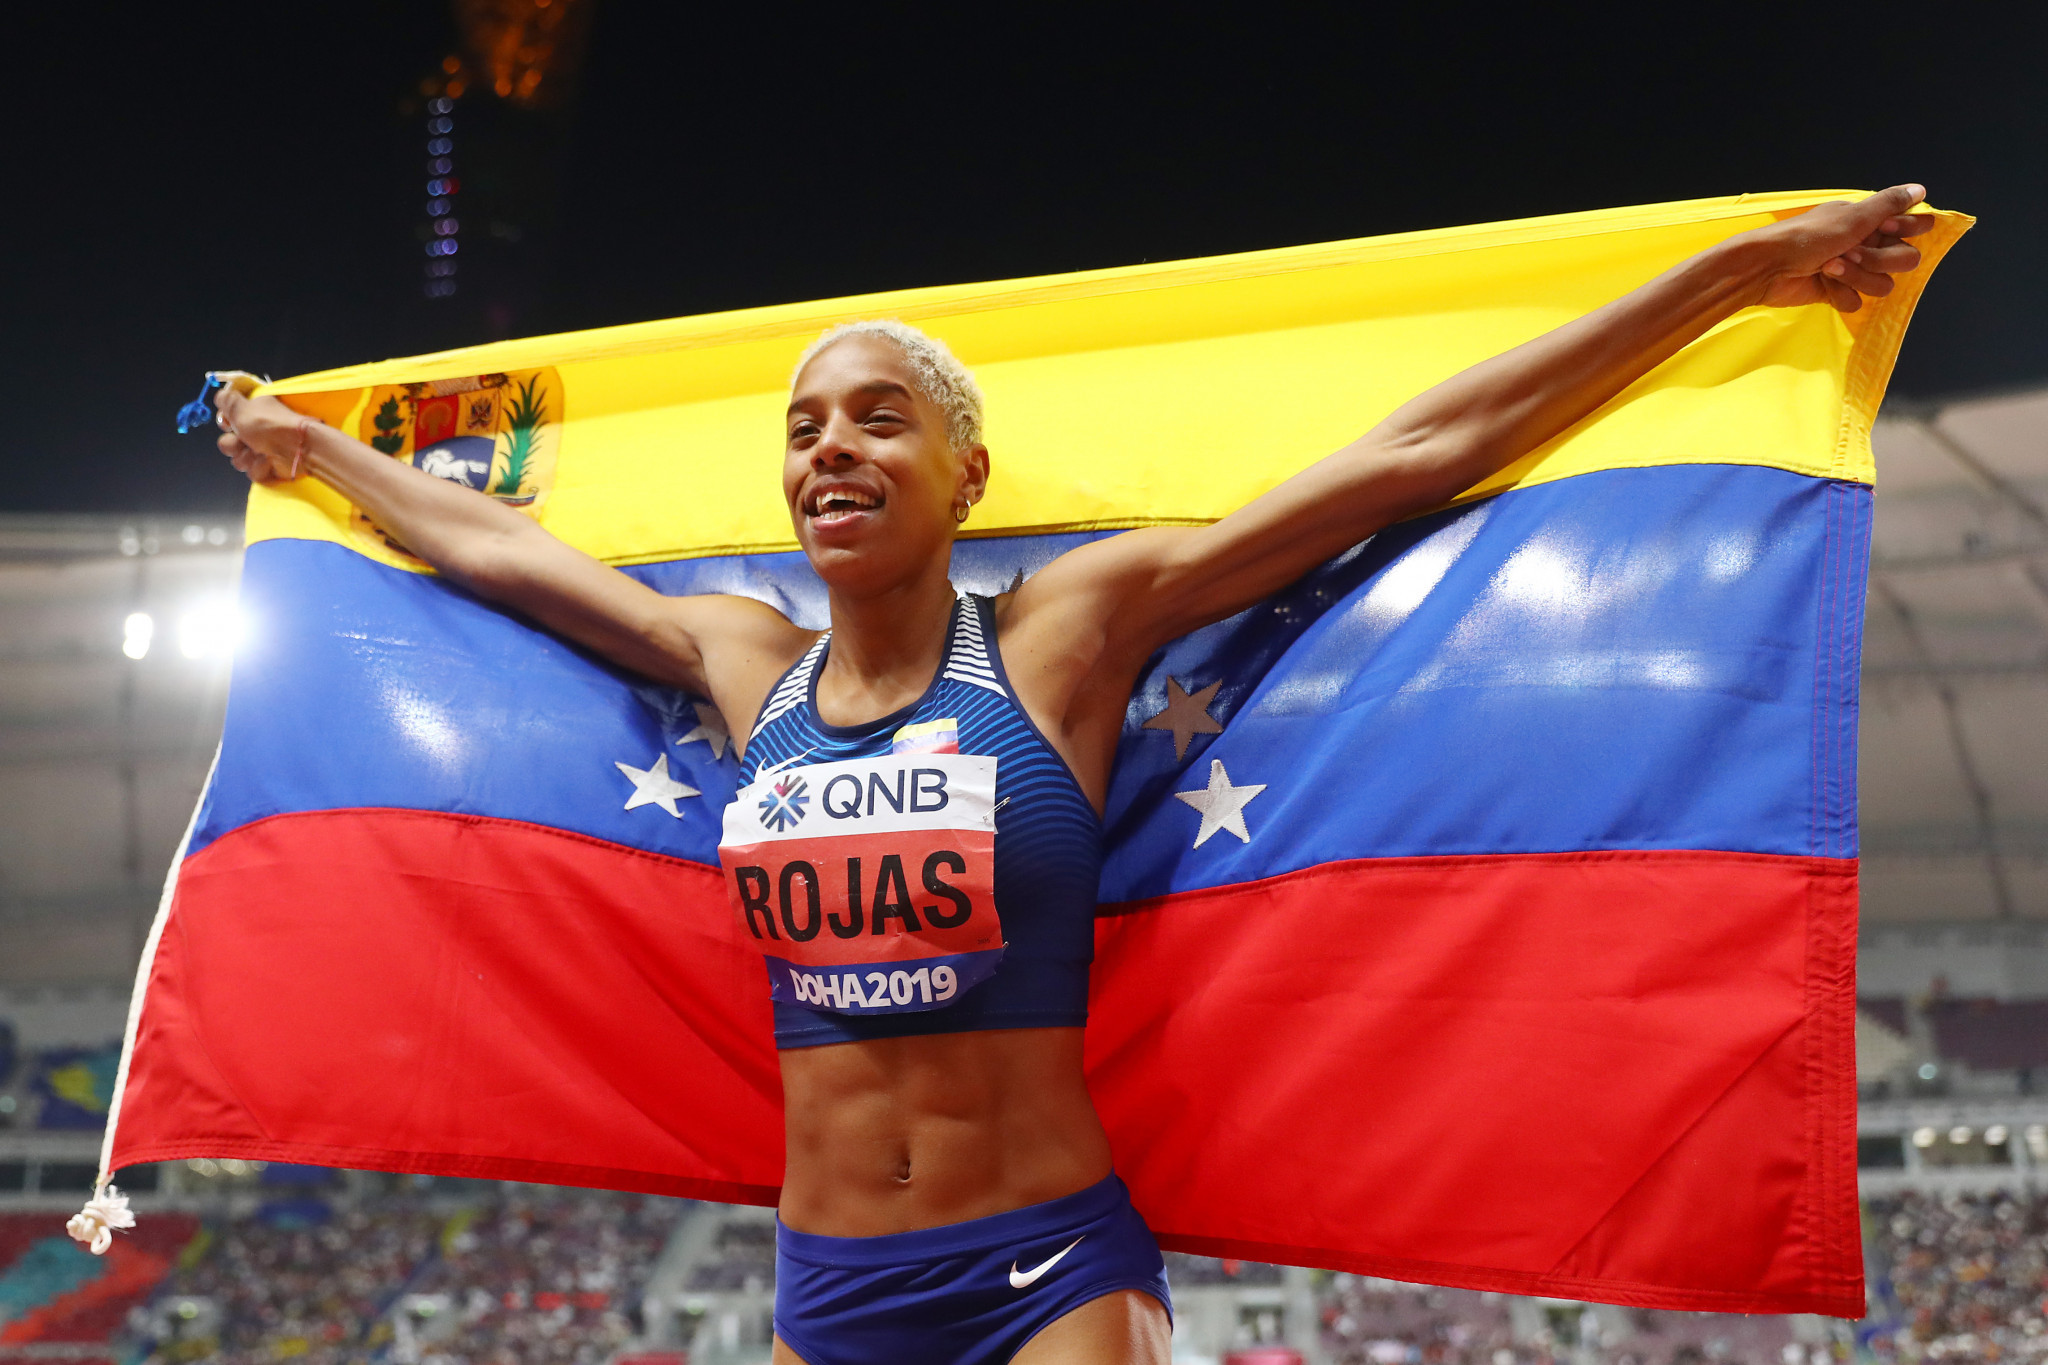 Venezuela's Olympic and world triple jump champion Yulimar Rojas is likely to be competing on day four of the World Athletics Championships in Oregon, which will showcase women's athletics ©Getty Images